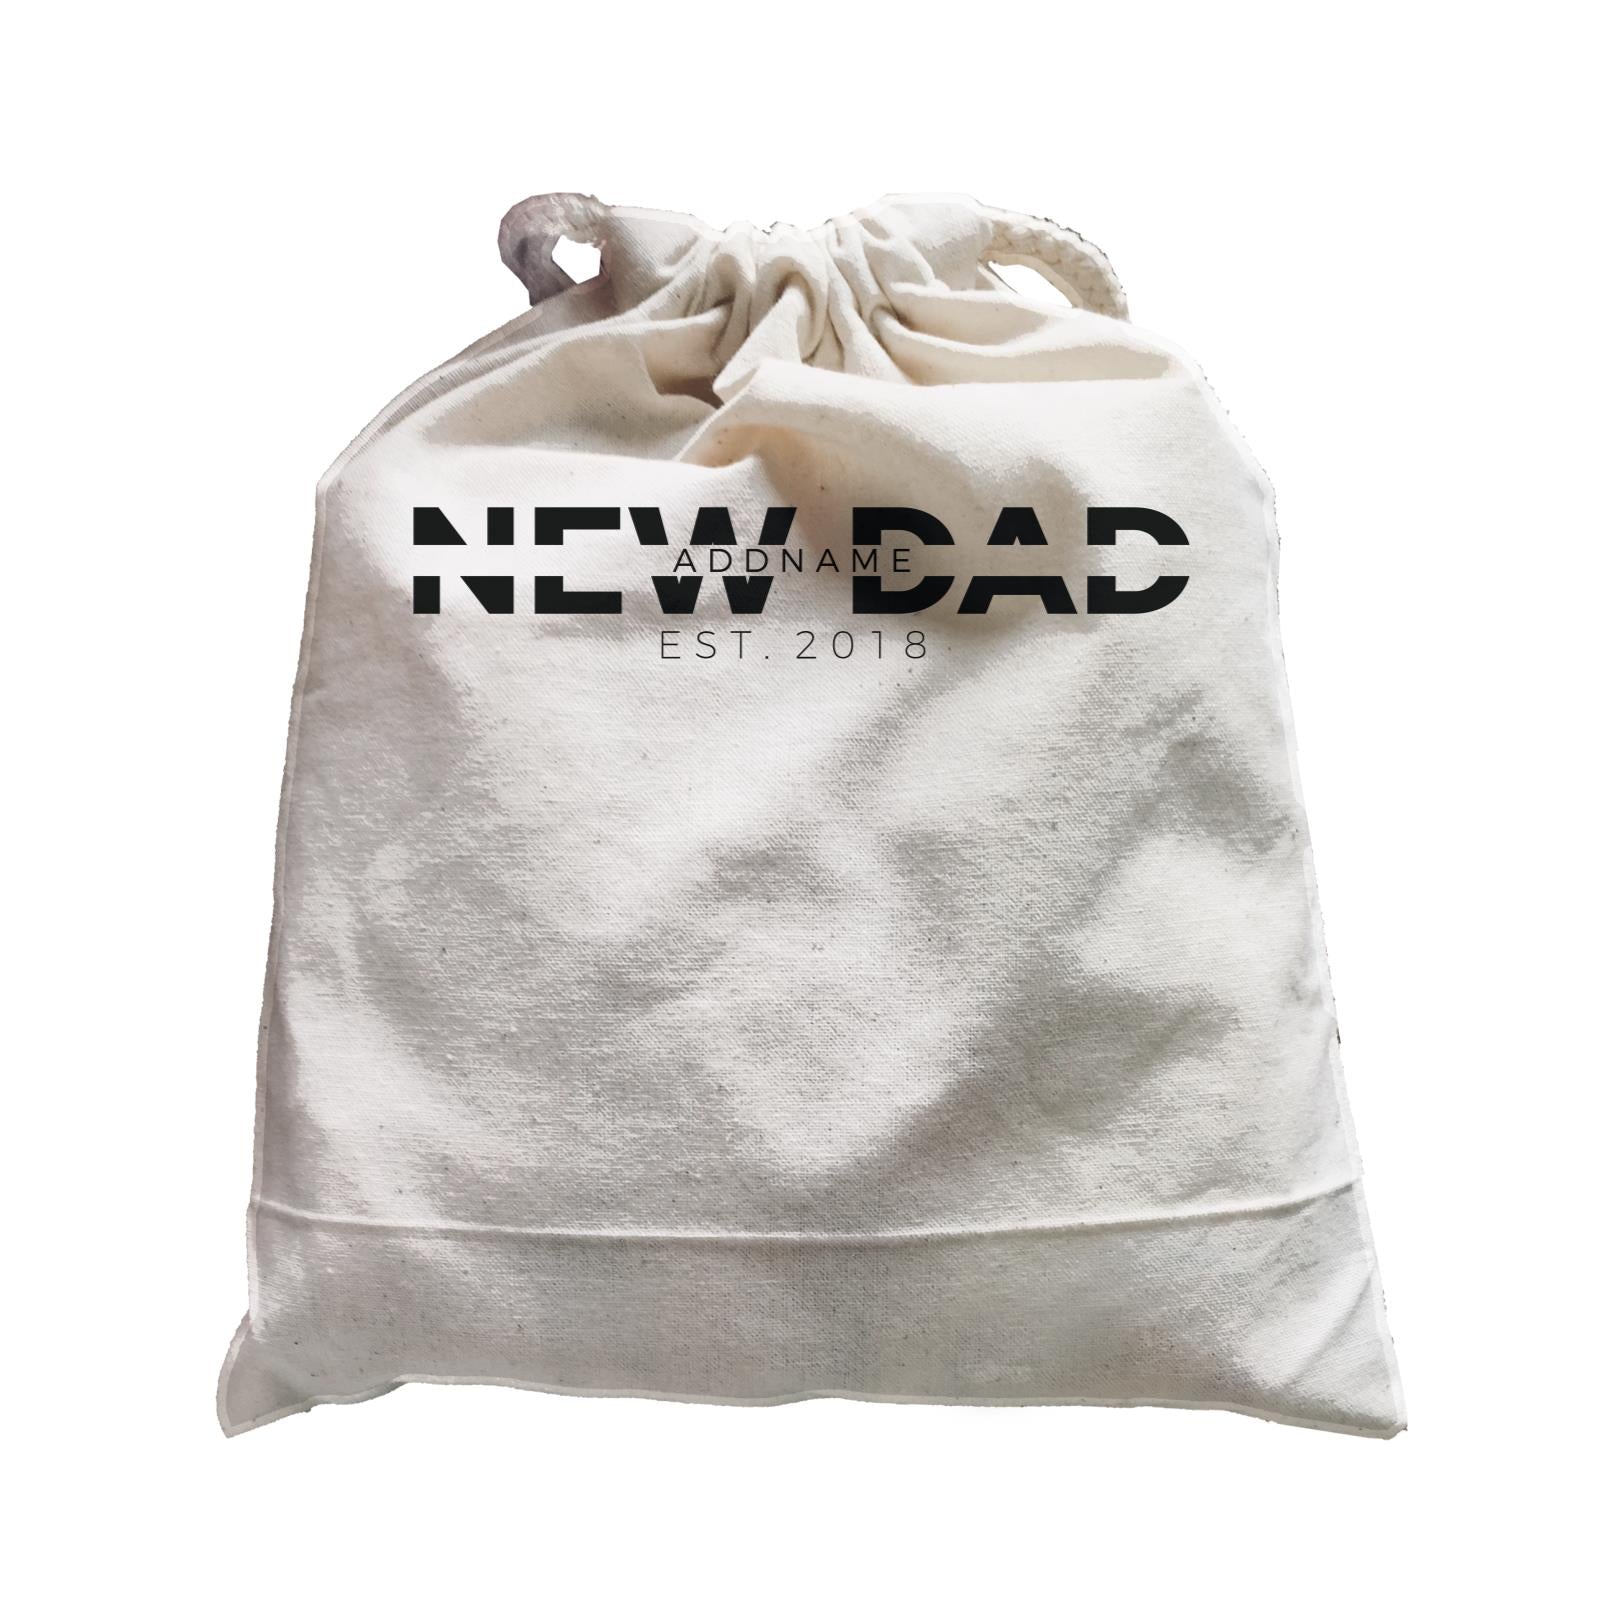 New Parent 2 New Dad Typography Addname With Date Satchel